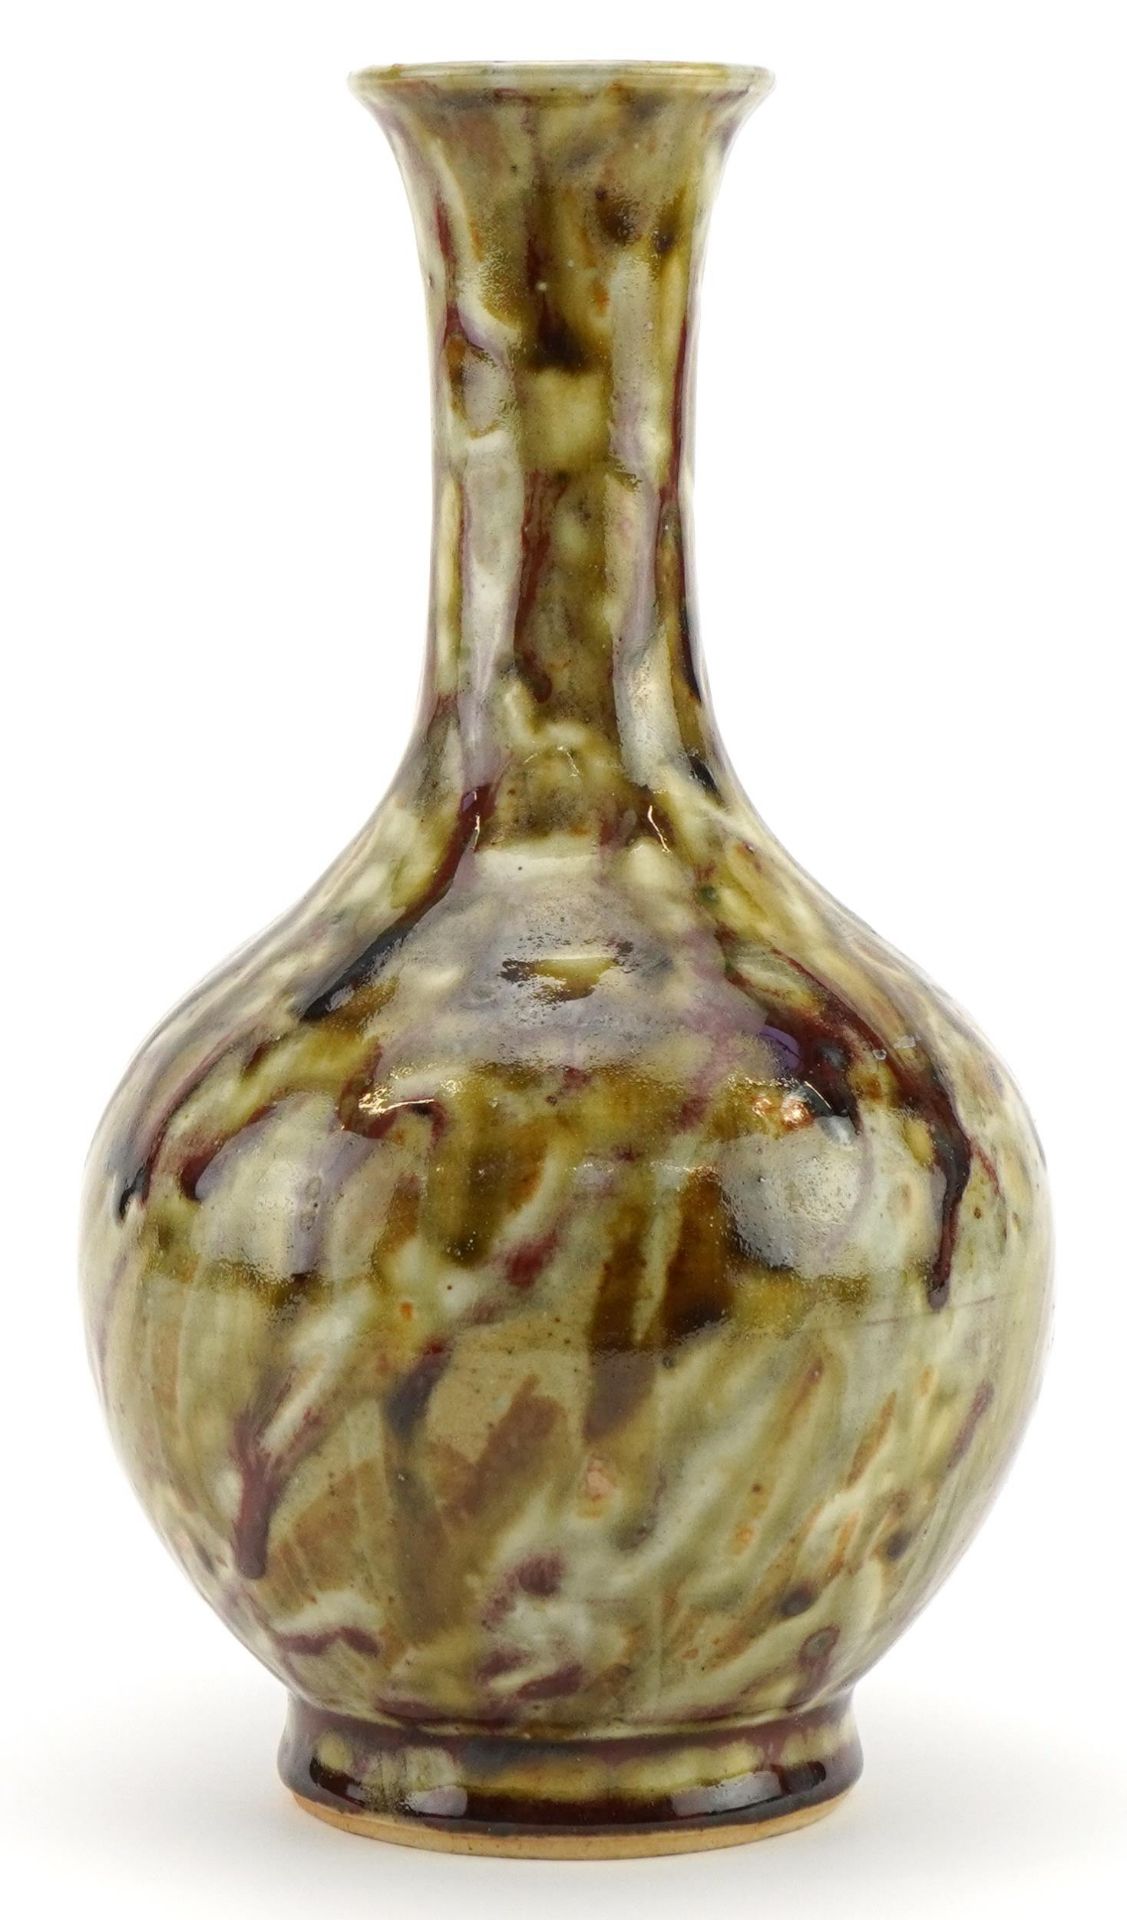 Chinese porcelain vase having a red and brown glaze, 22.5cm high - Image 2 of 3